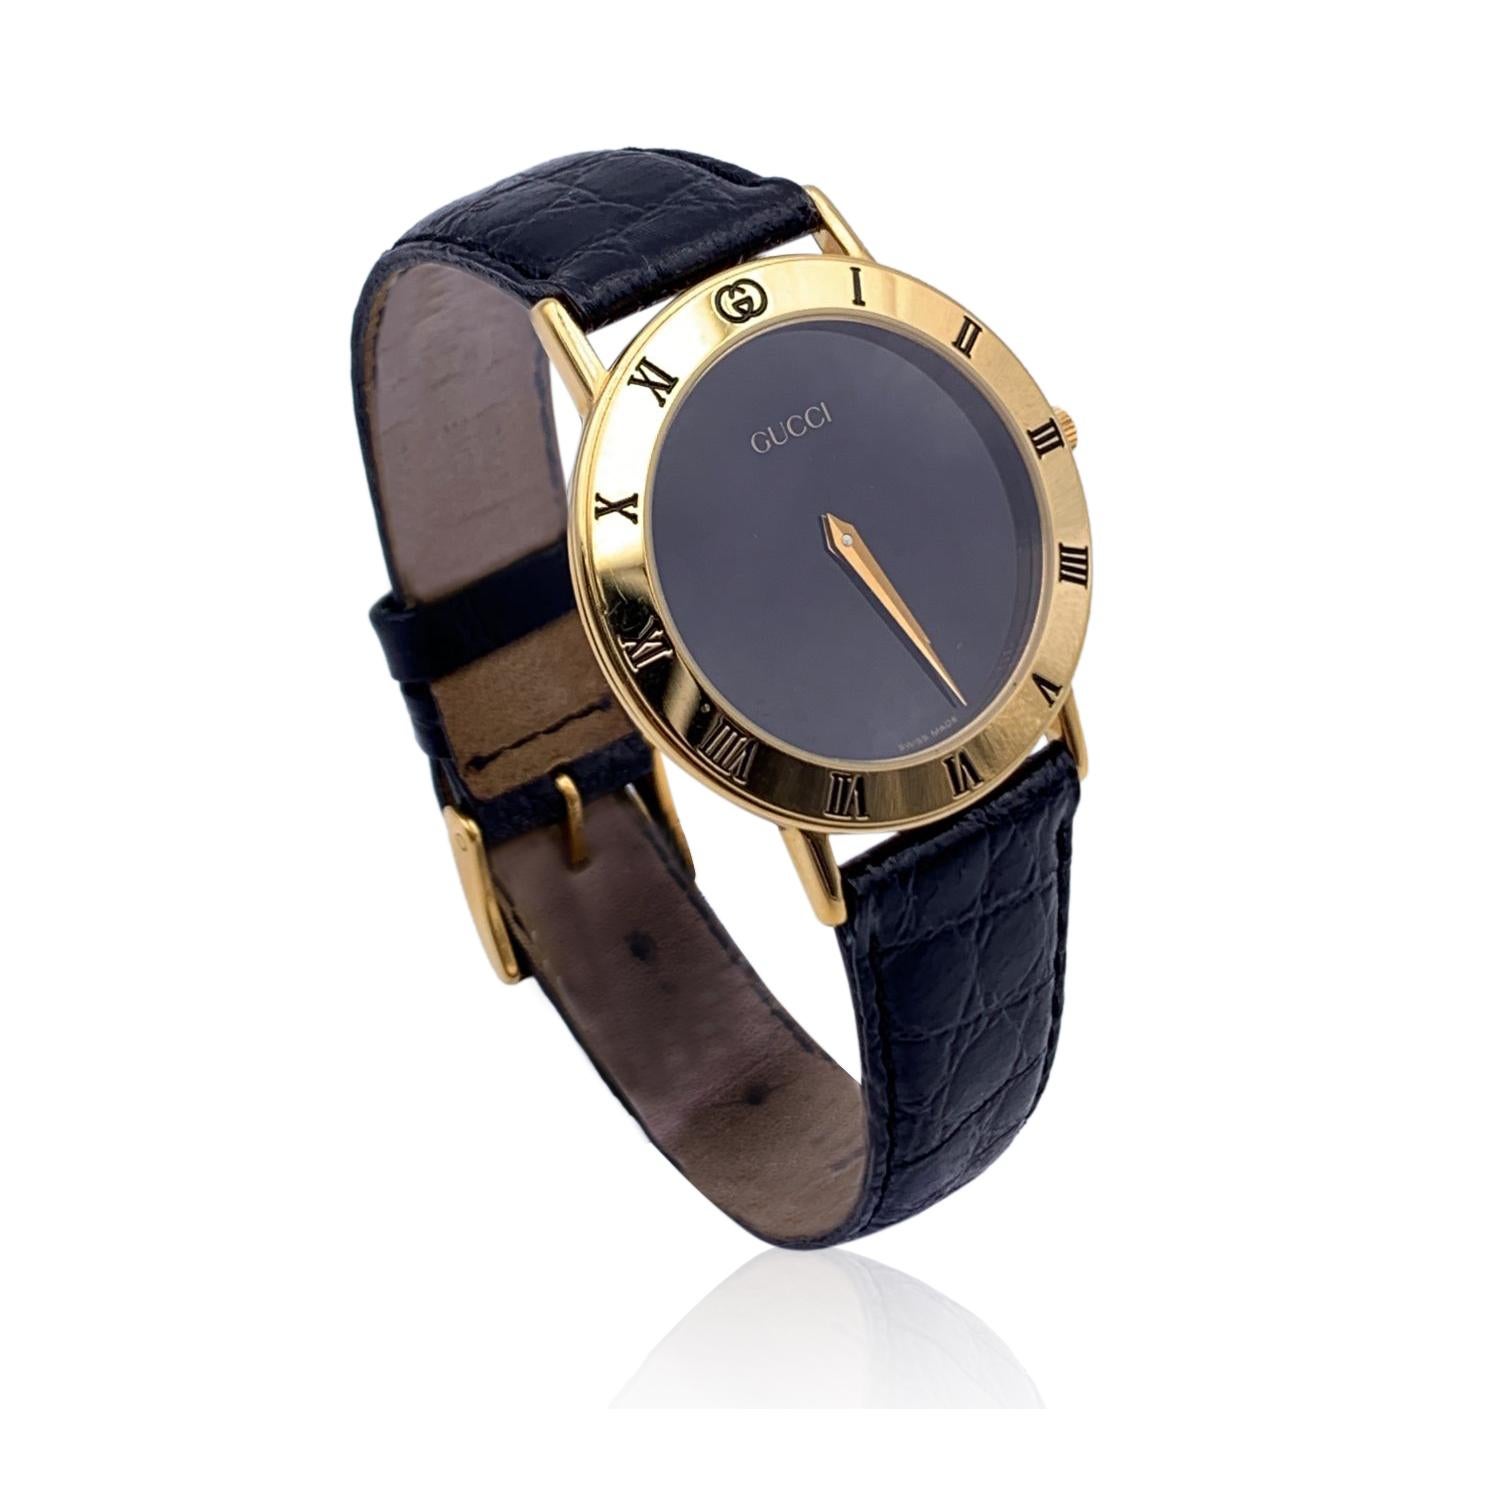 Beautiful vintage wristwatch by GUCCI. Round gold metal stainless steel case. Black dial. Swiss Made Quartz Movement. Black leather wrist strap with 7 holes adjustment. GG - GUCCI buckle. Roman numbers engraved on the bezel. 'GUCCI' lettering on the